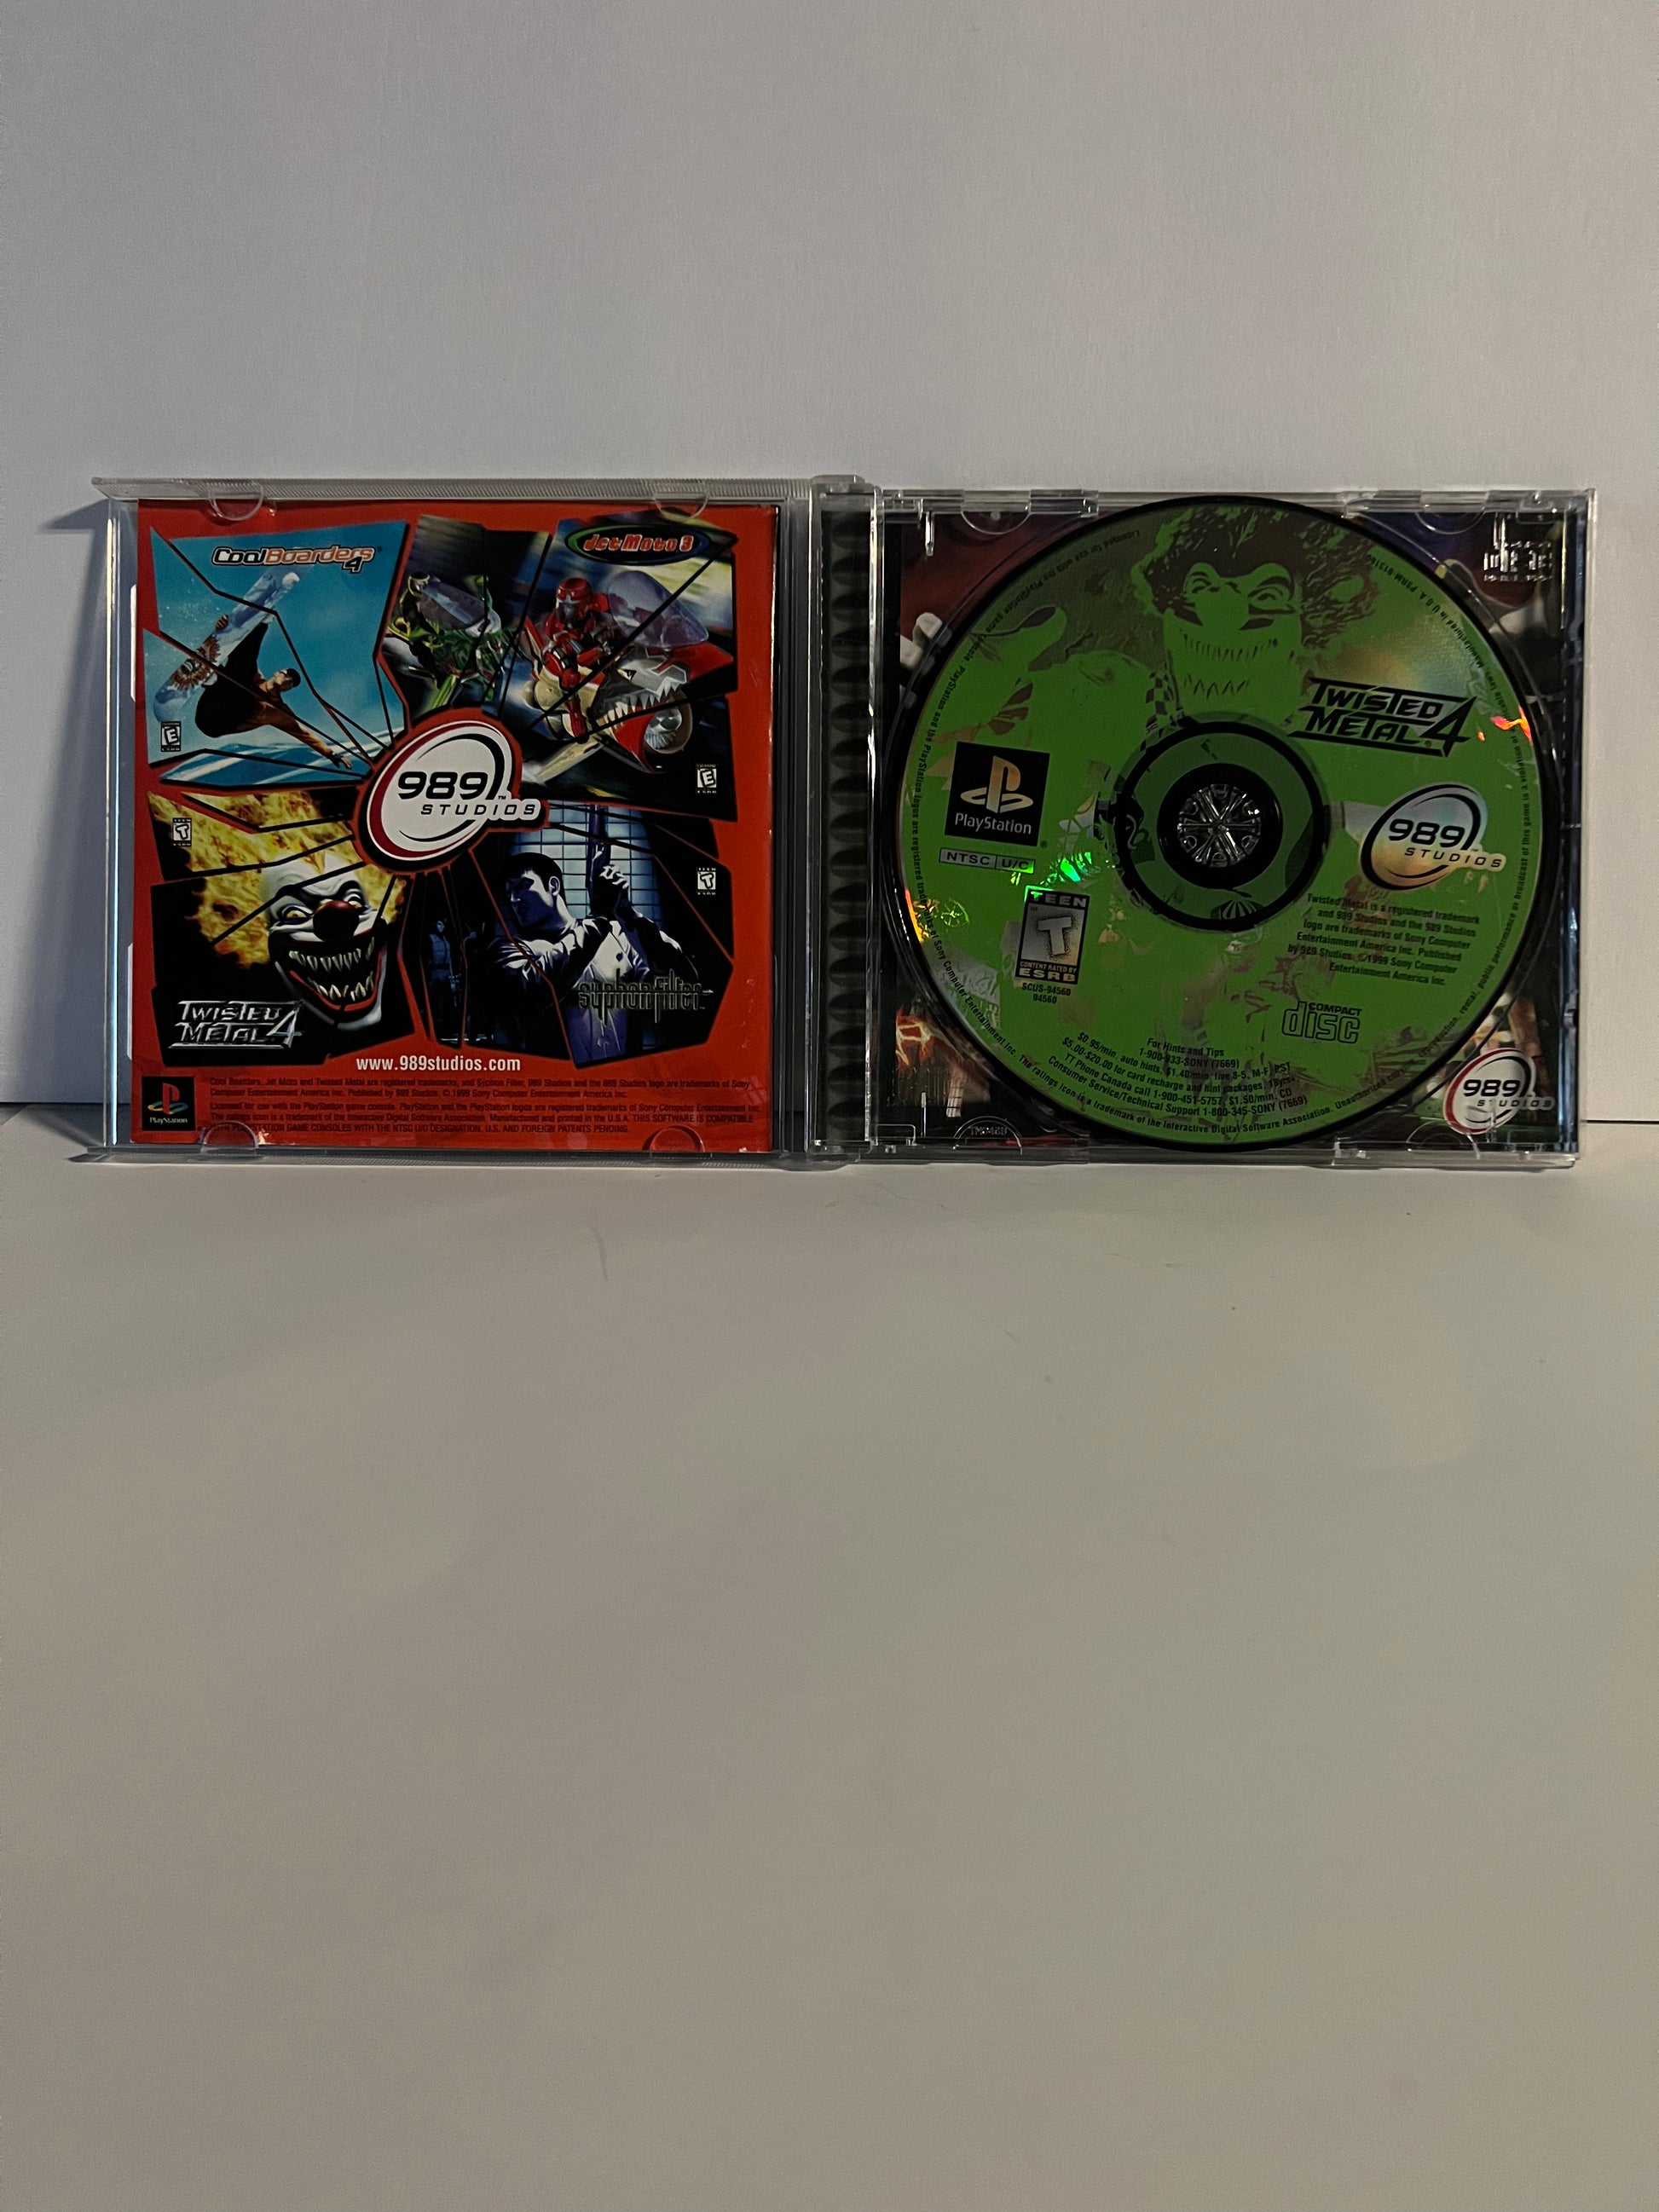 Twisted Metal 4 Demo Disc 